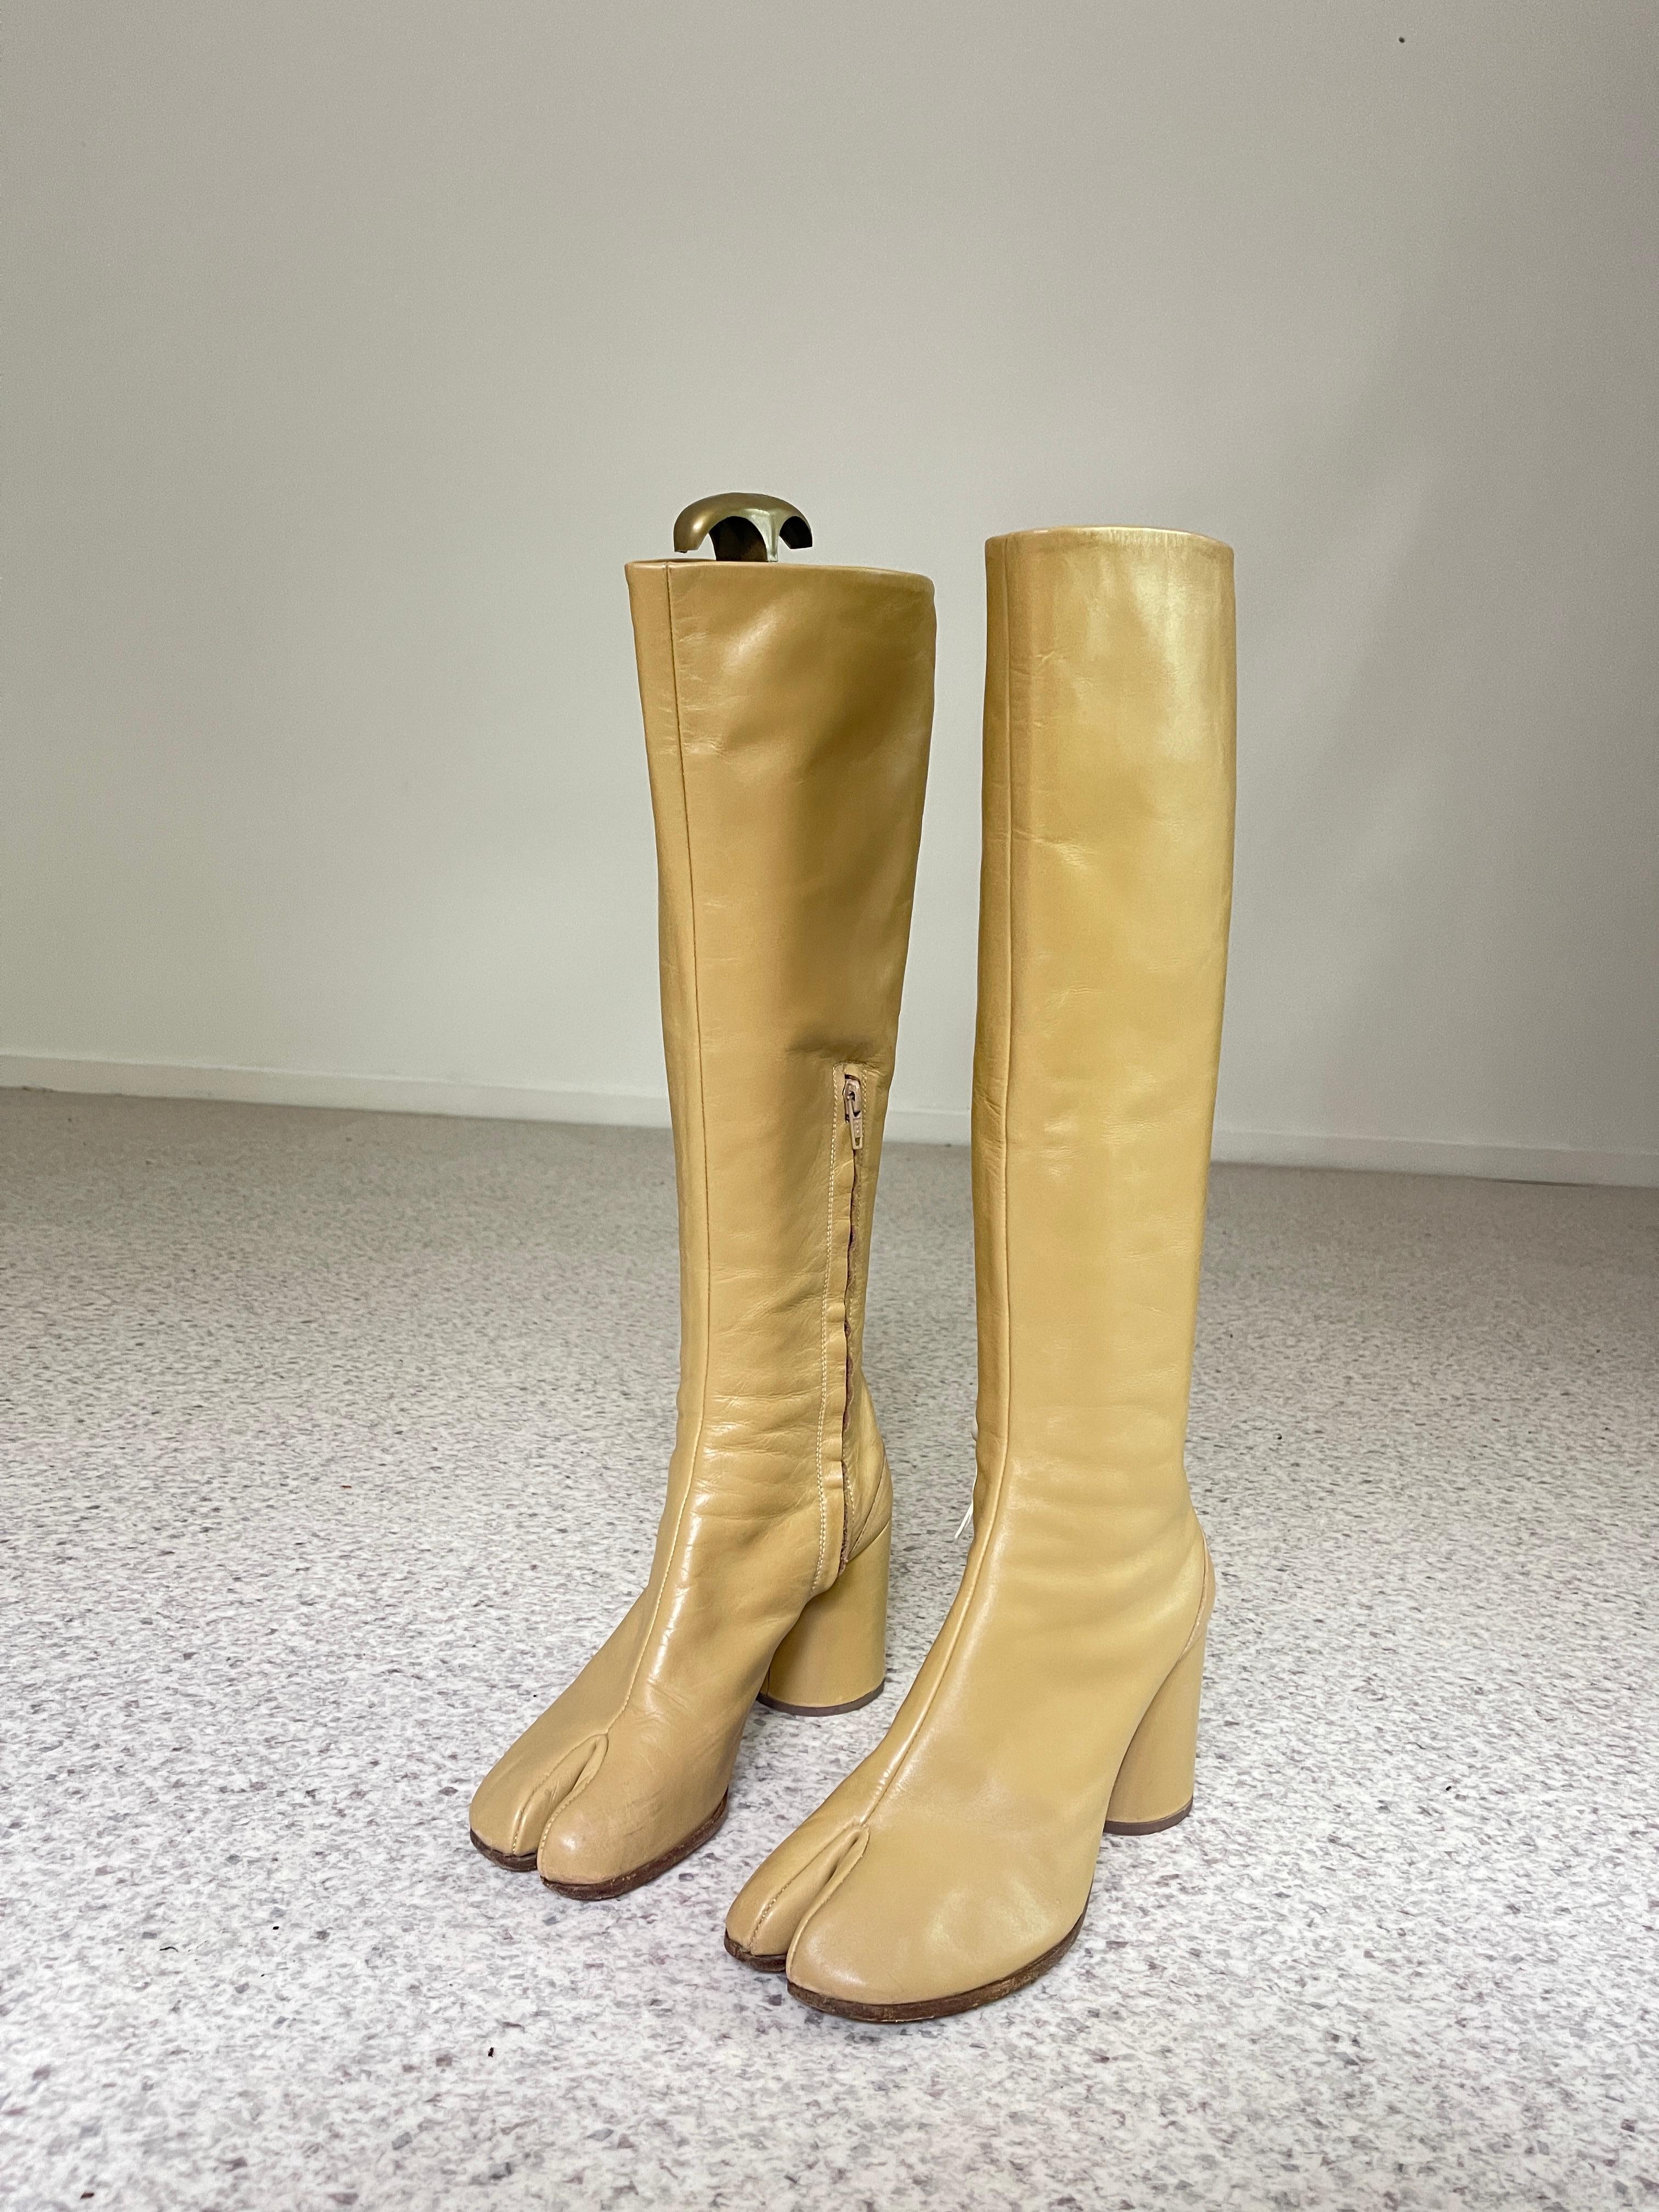 Margiela Tabi Knee High Boots 2004 look book collection  Beige  Leather Size EU 38 U.K 5

Collectors, archivers and serious fashion lovers this is for you.

From the fall 2004 runway collection

Part of Margiela’s 1 line before footwear became part